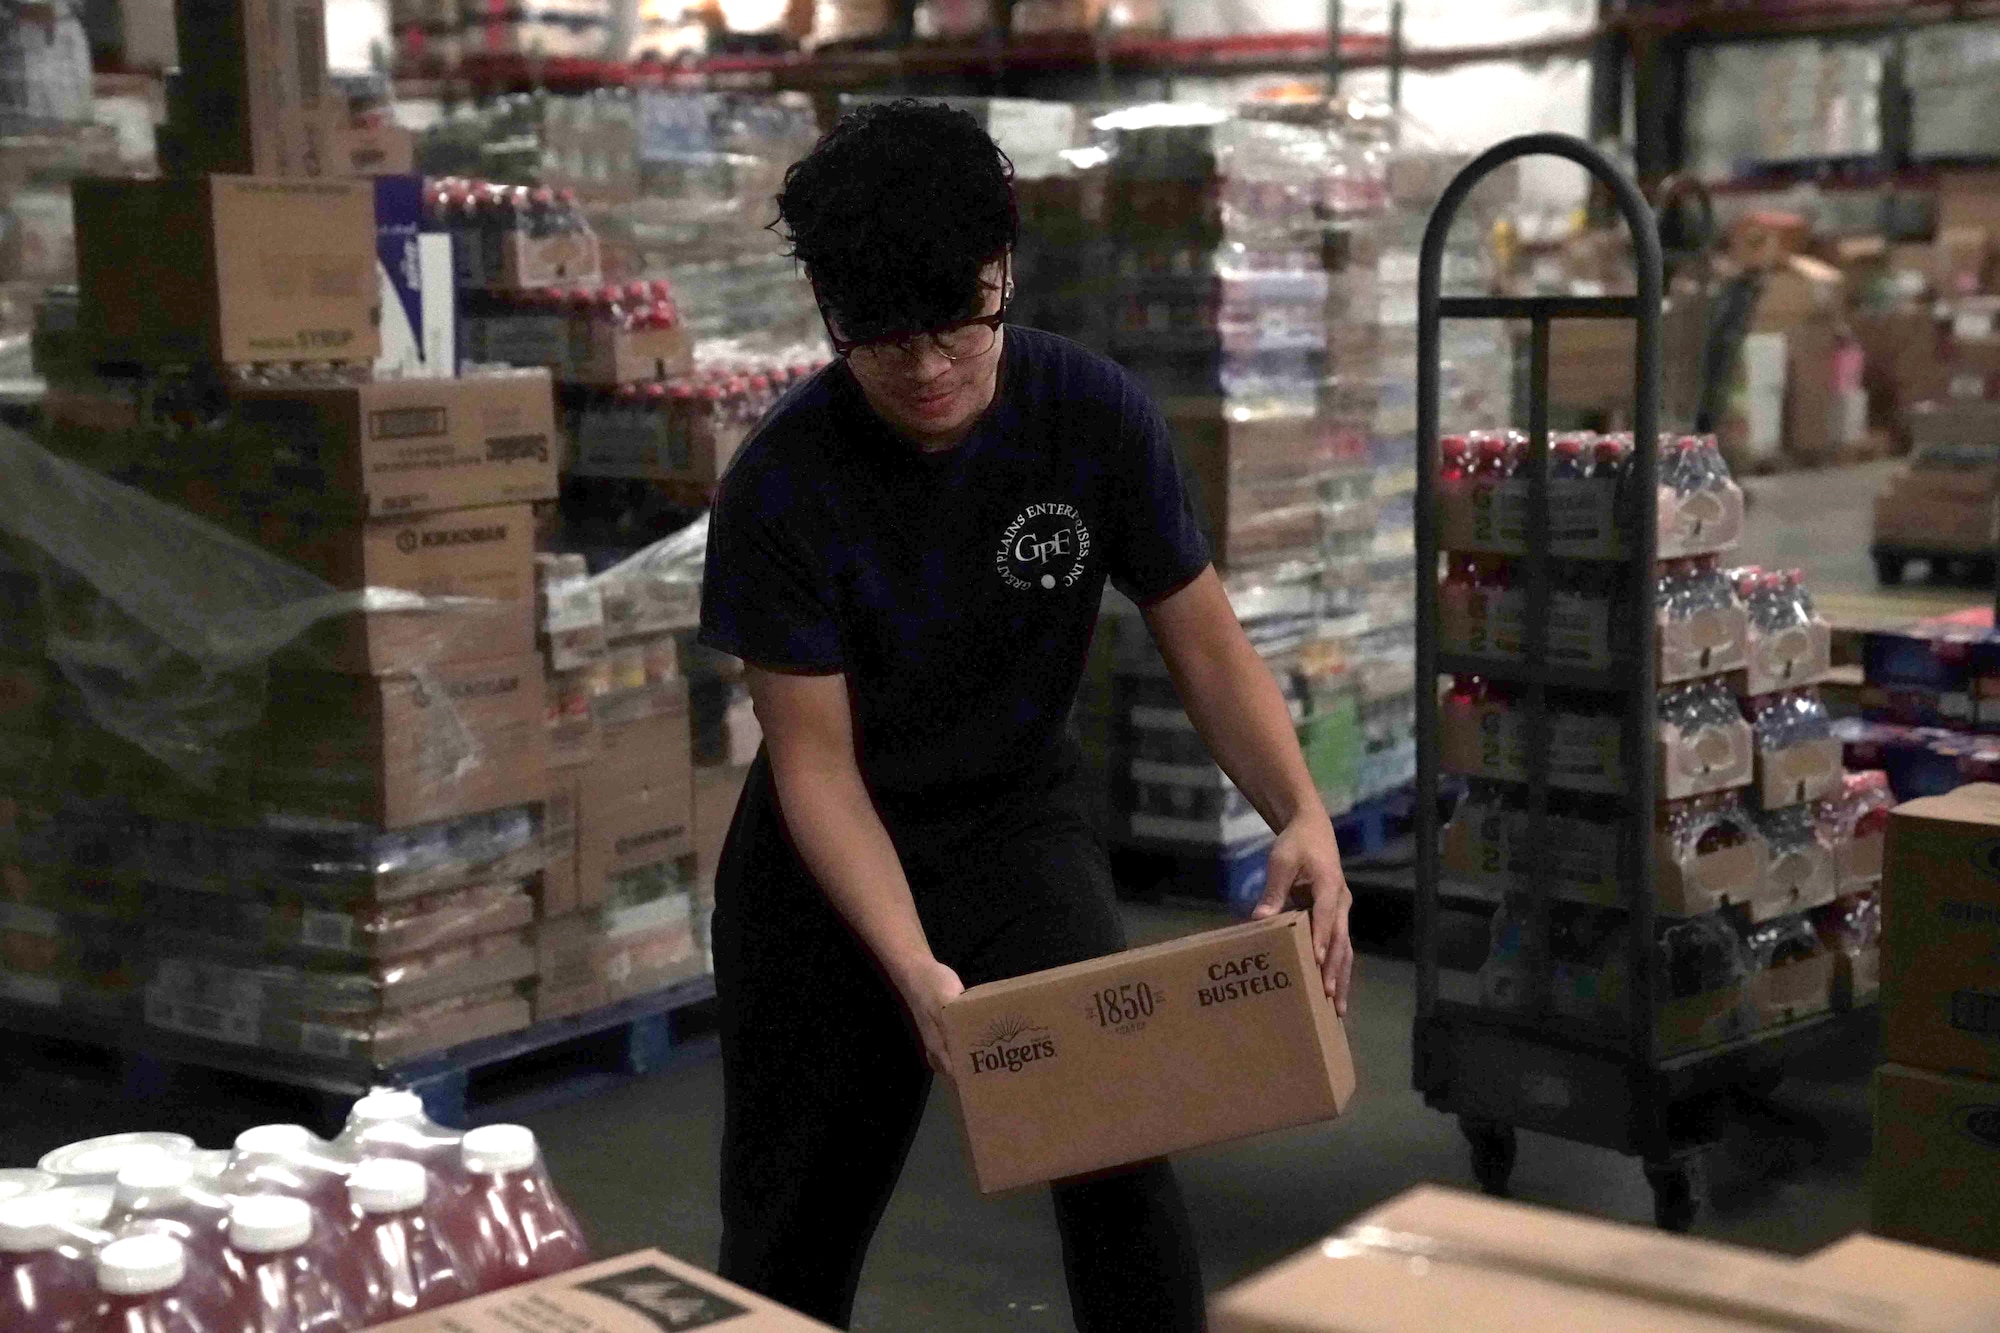 Angelo Manlangit, a stock room sorter, unpacks pallets in the commissary warehouse on Nellis Air Force Base, Nevada, March 24, 2020. Since the COVID-19 pandemic, the commissary receives pallets daily and restocks the shelves to replenish items for the morning rush. (U.S. Air Force photo by Senior Airman Stephanie Gelardo)